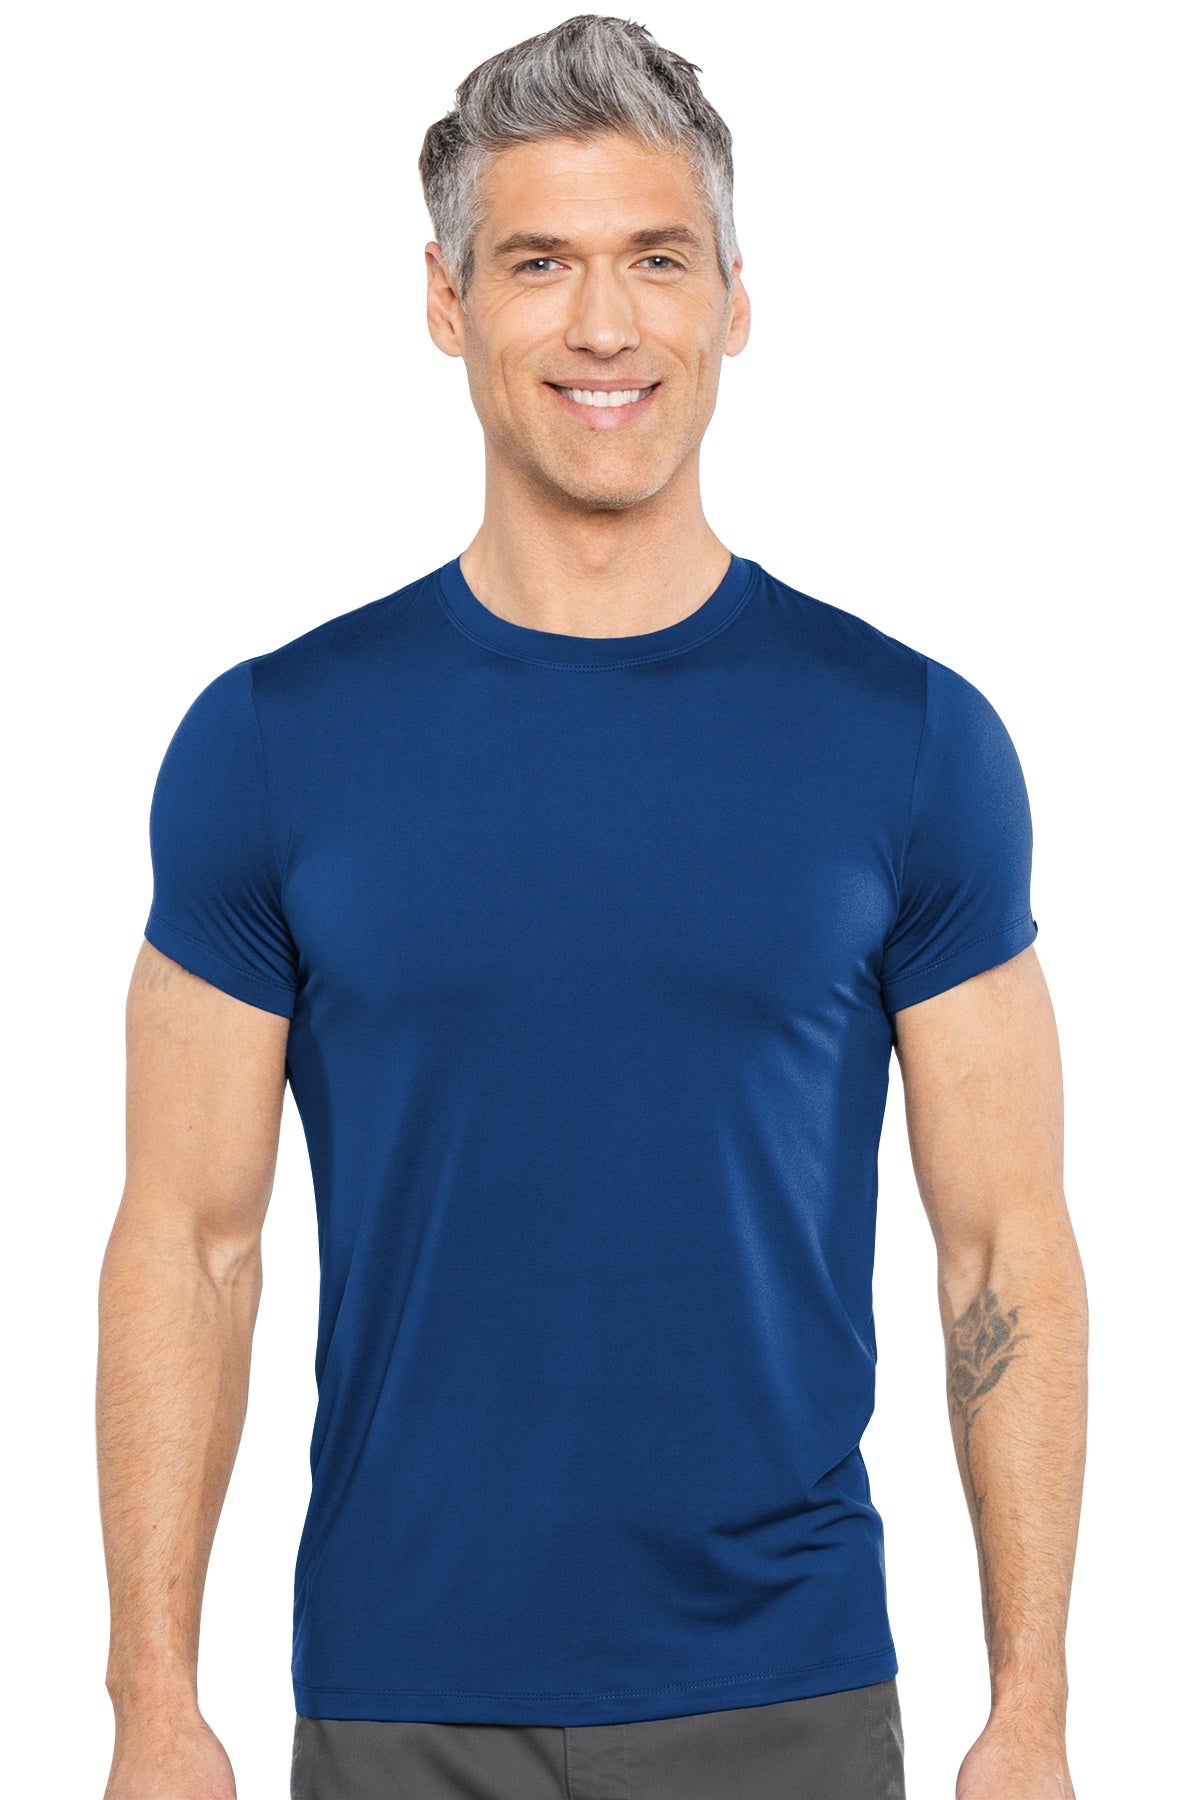 Med Couture Mens Scrub Top RothWear Mason Tee in Navy at Parker's Clothing and Shoes.